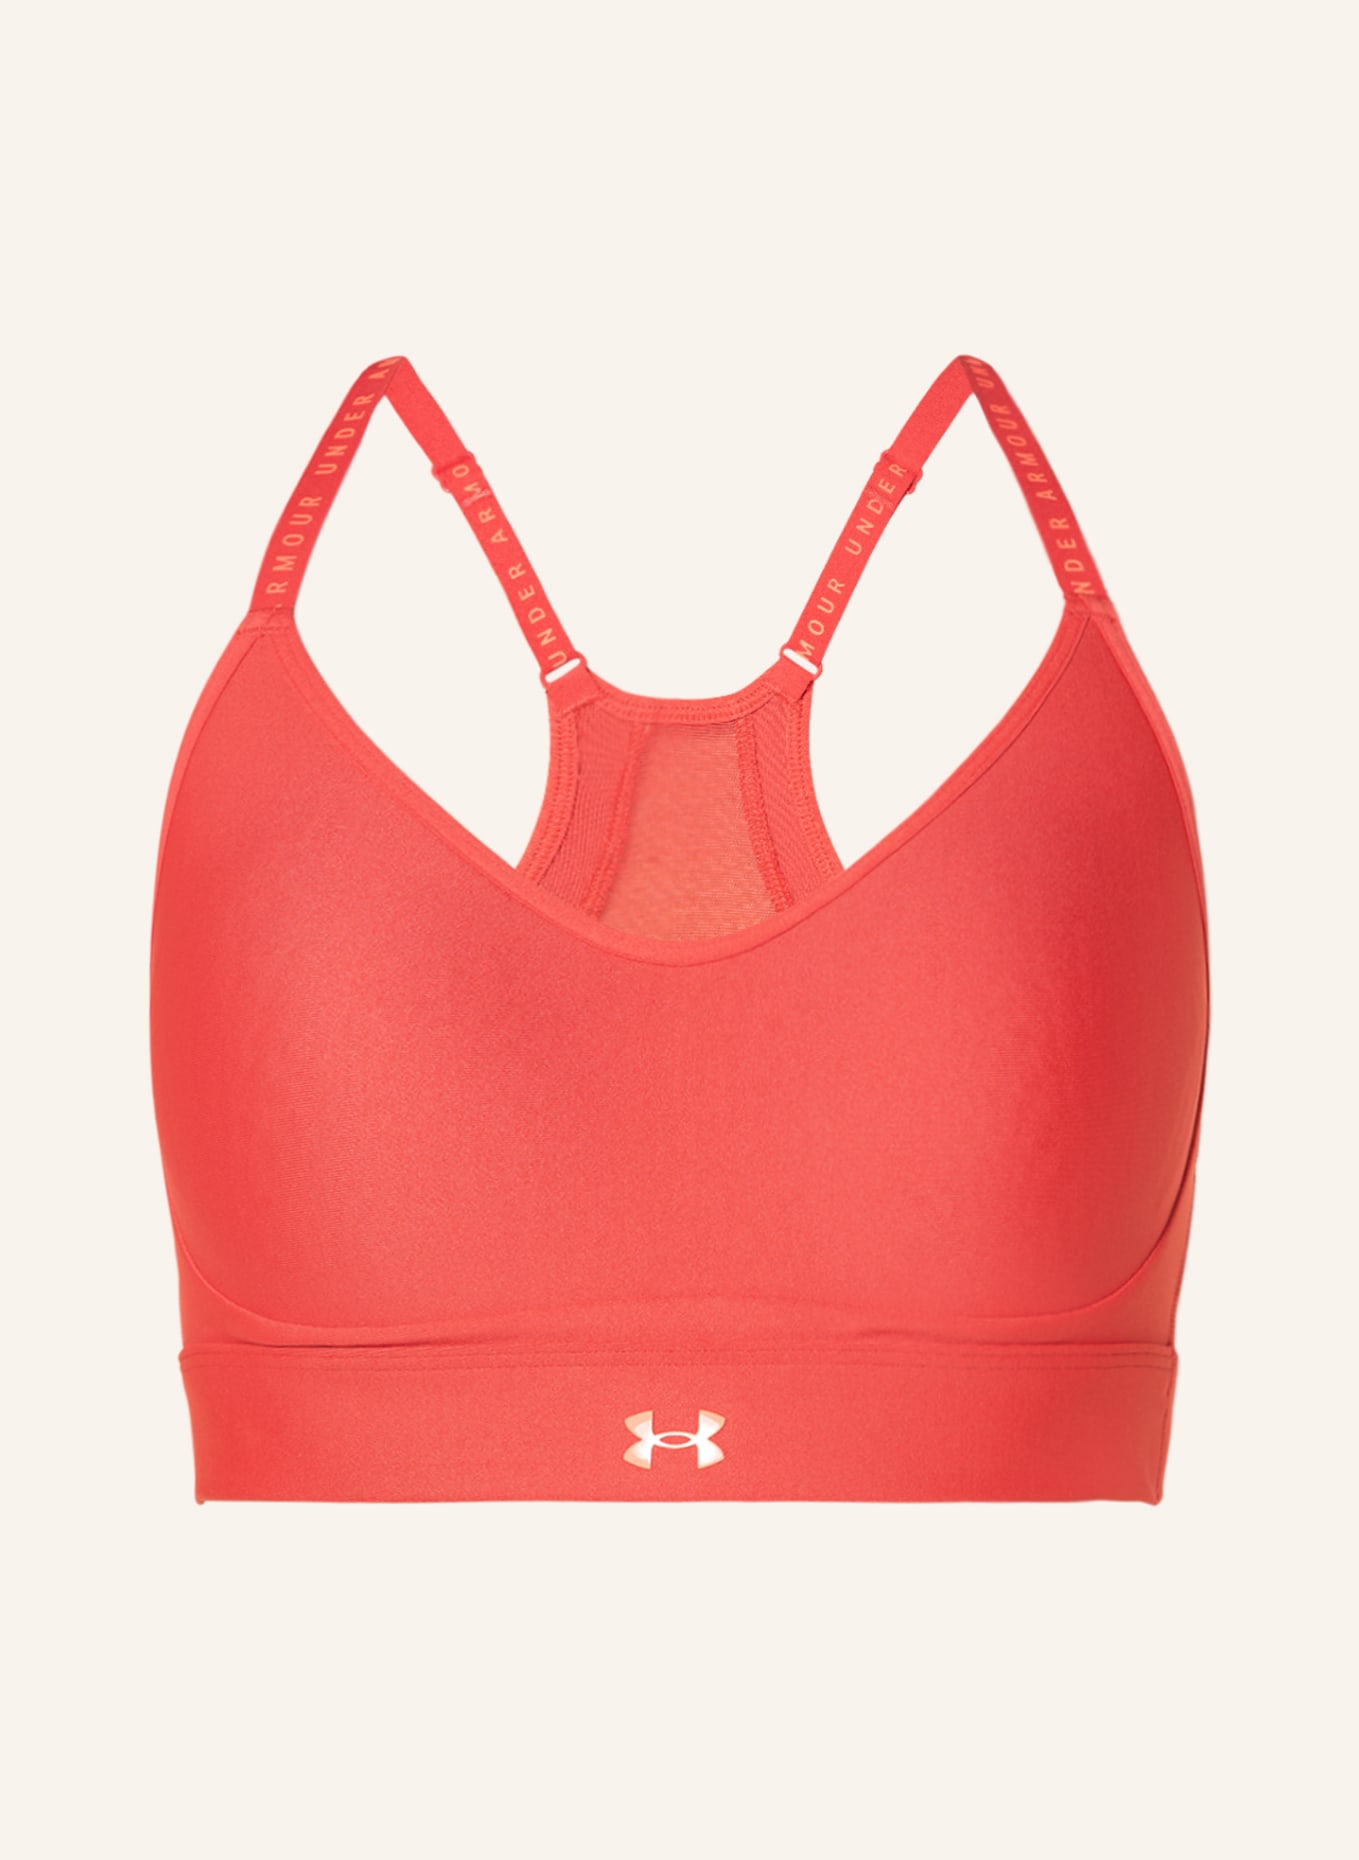 UNDER ARMOUR Sport-BH INFINITY COVERED, Farbe: ROT (Bild 1)